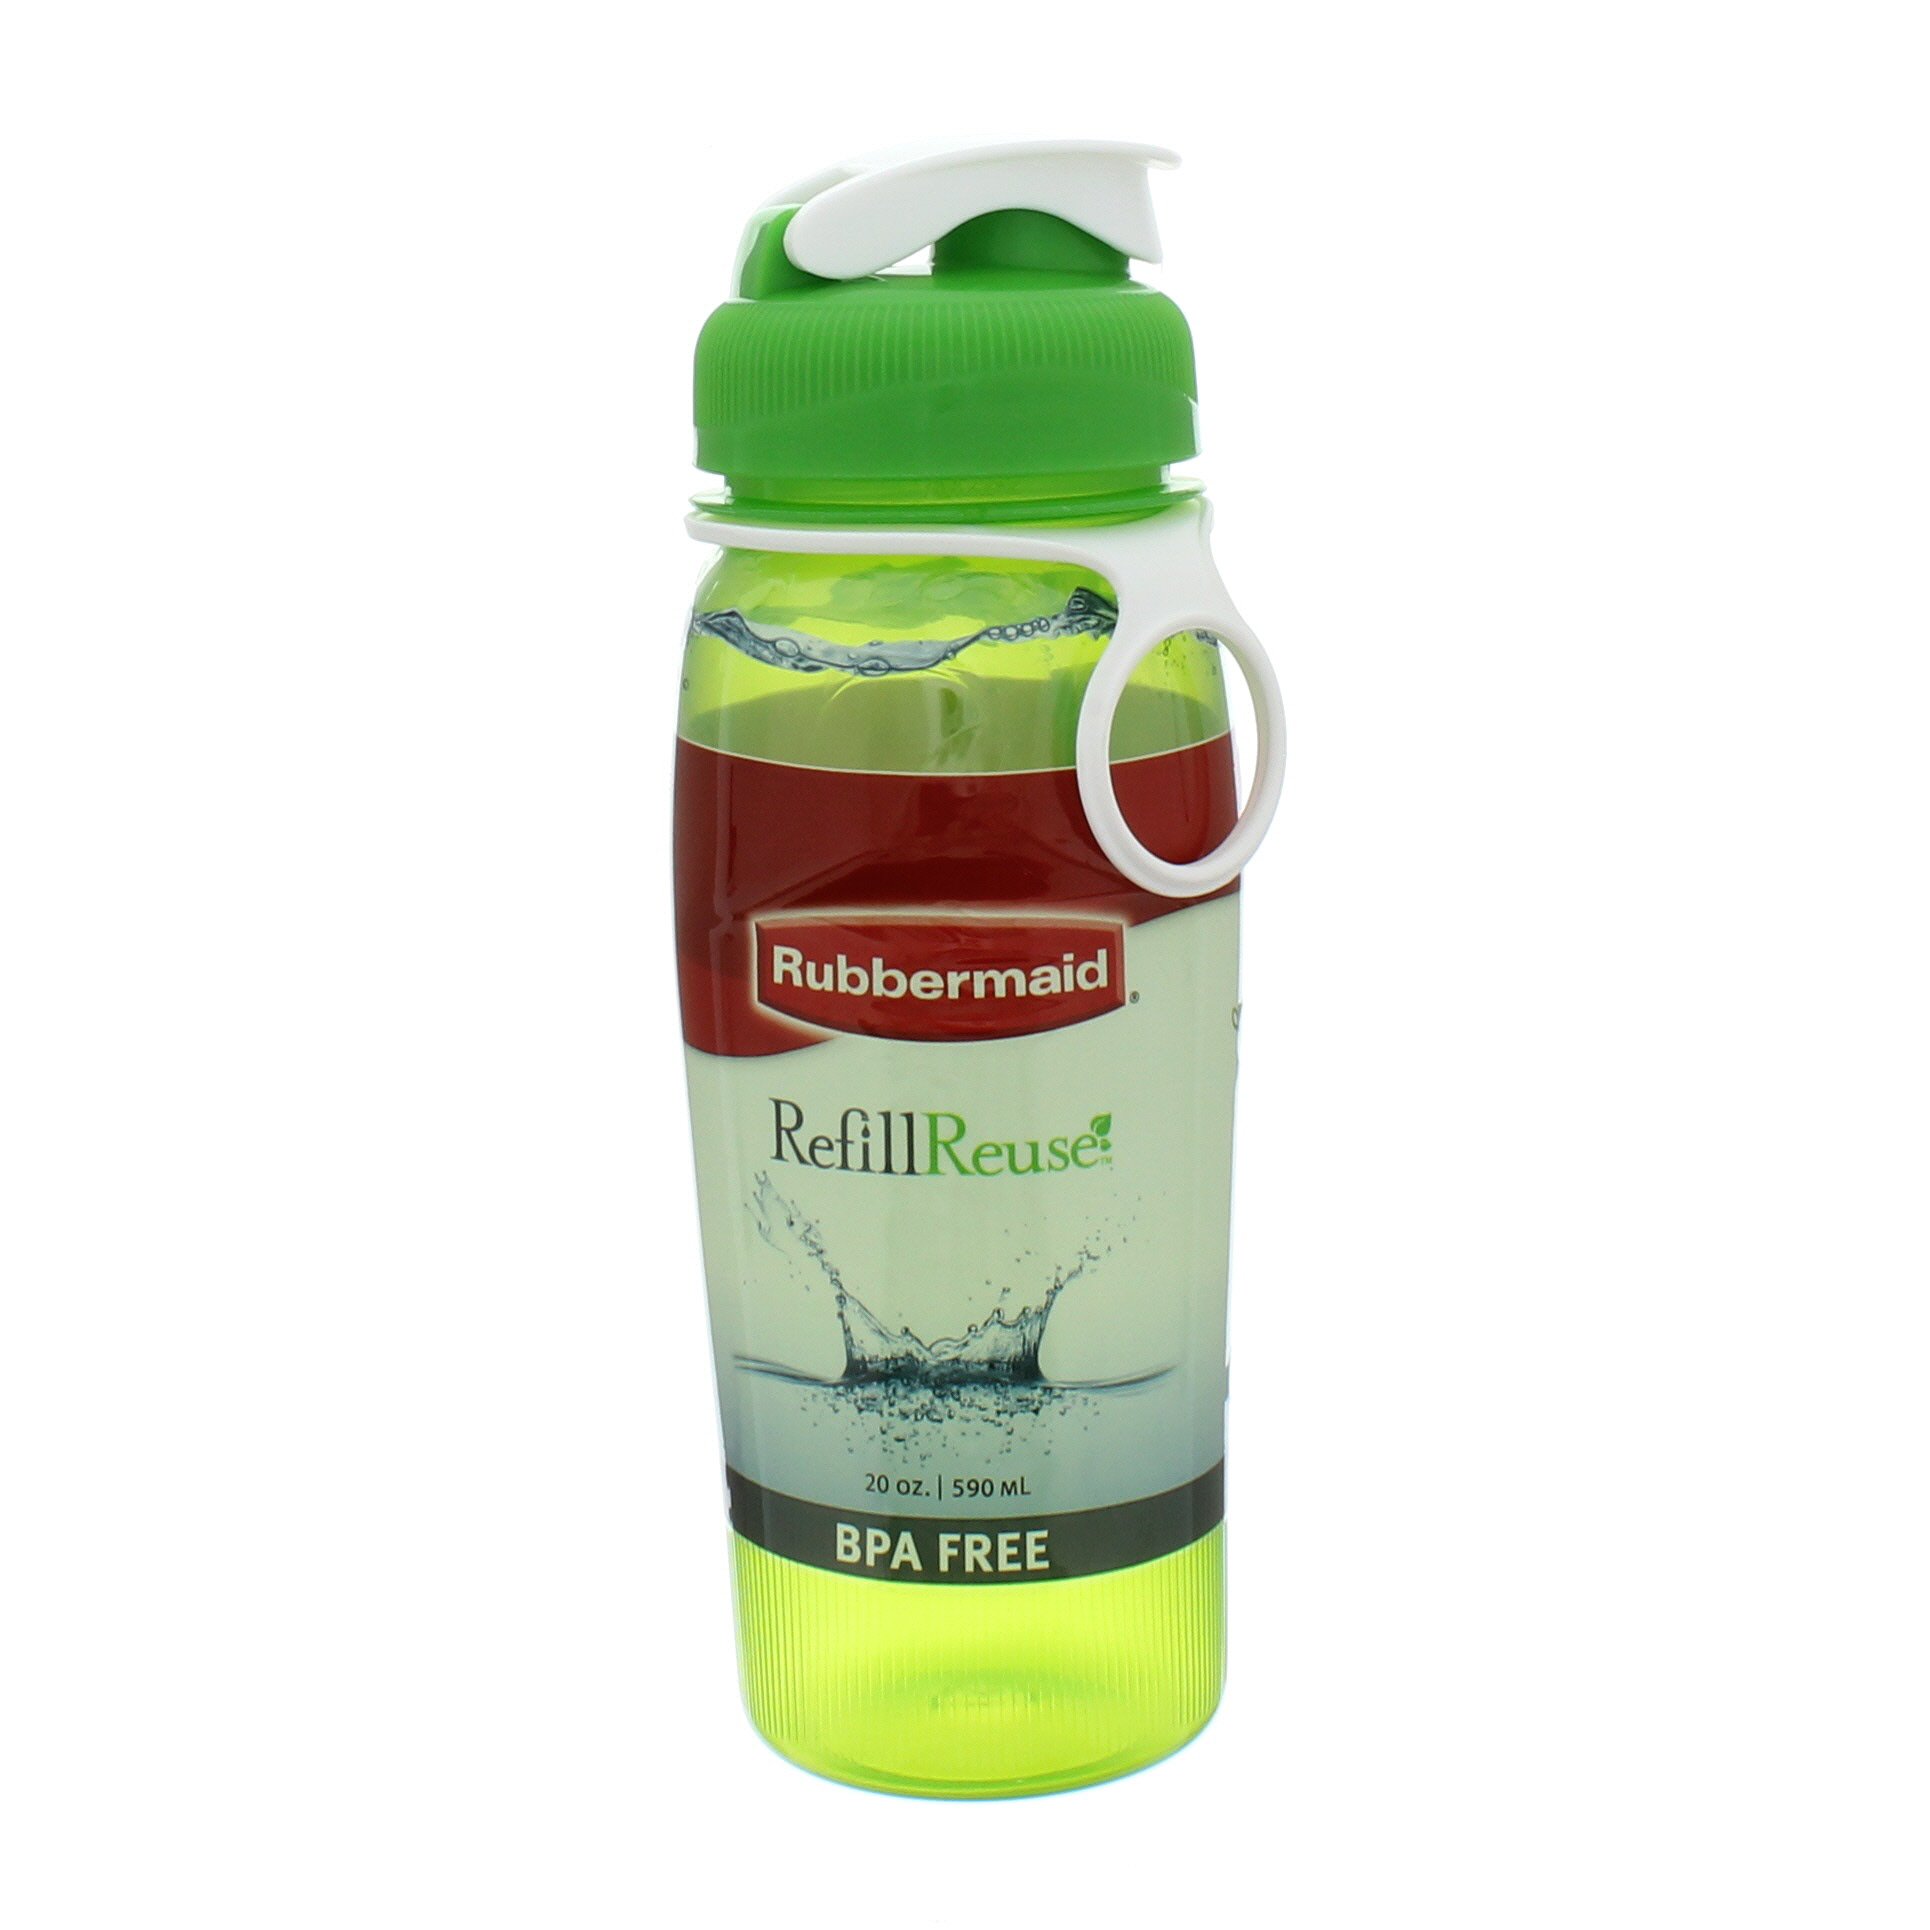 Rubbermaid Chug 24-fl oz Plastic Water Bottle (3-Pack) in the